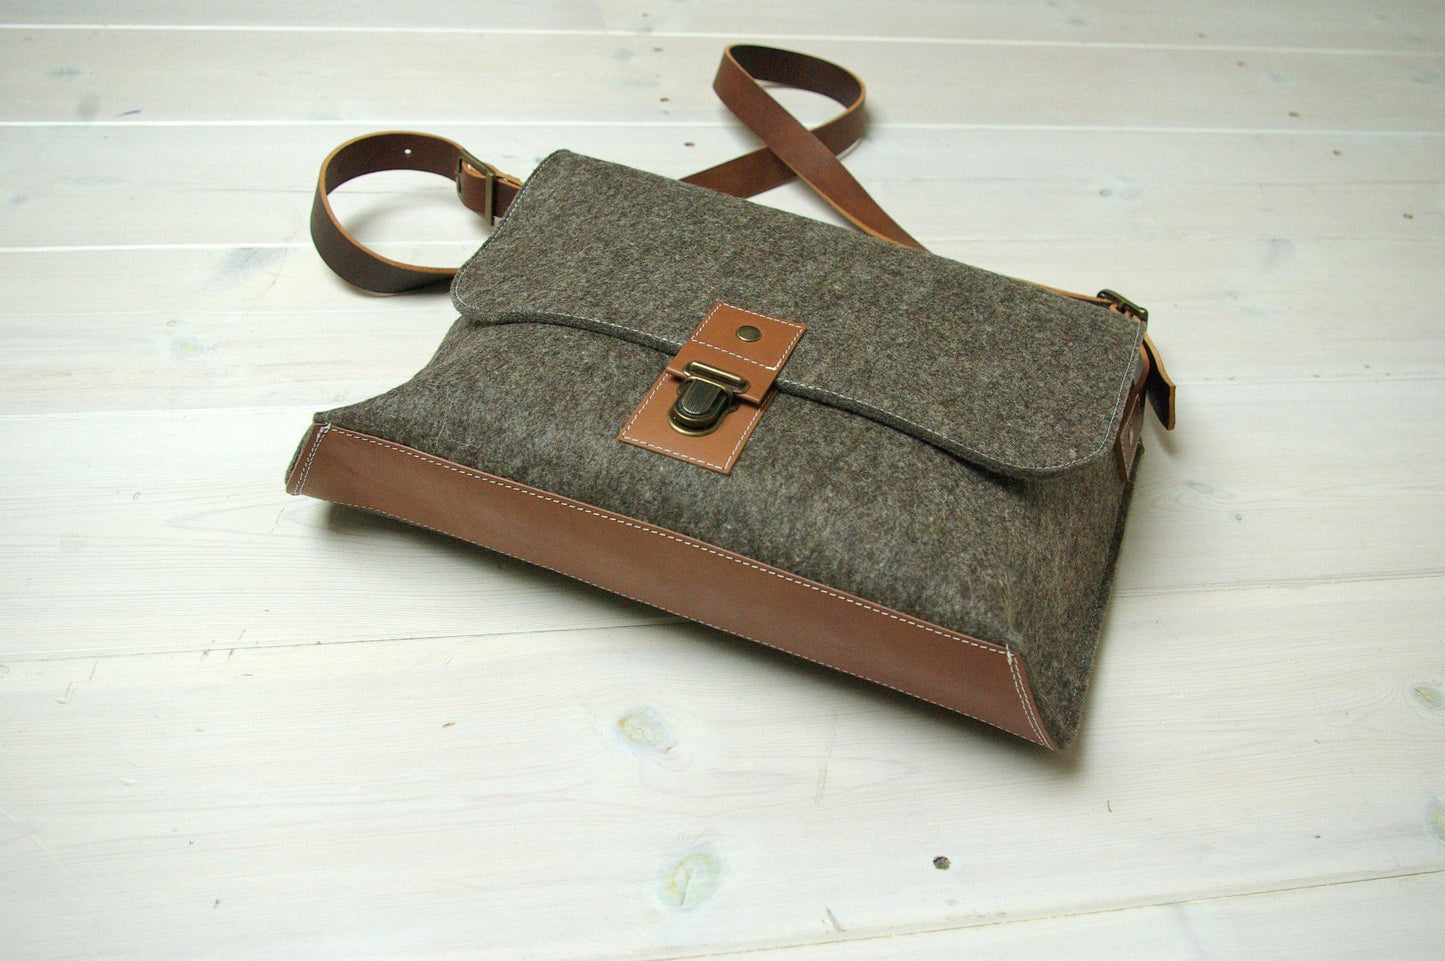 felt and leather messenger bag by westerman bags